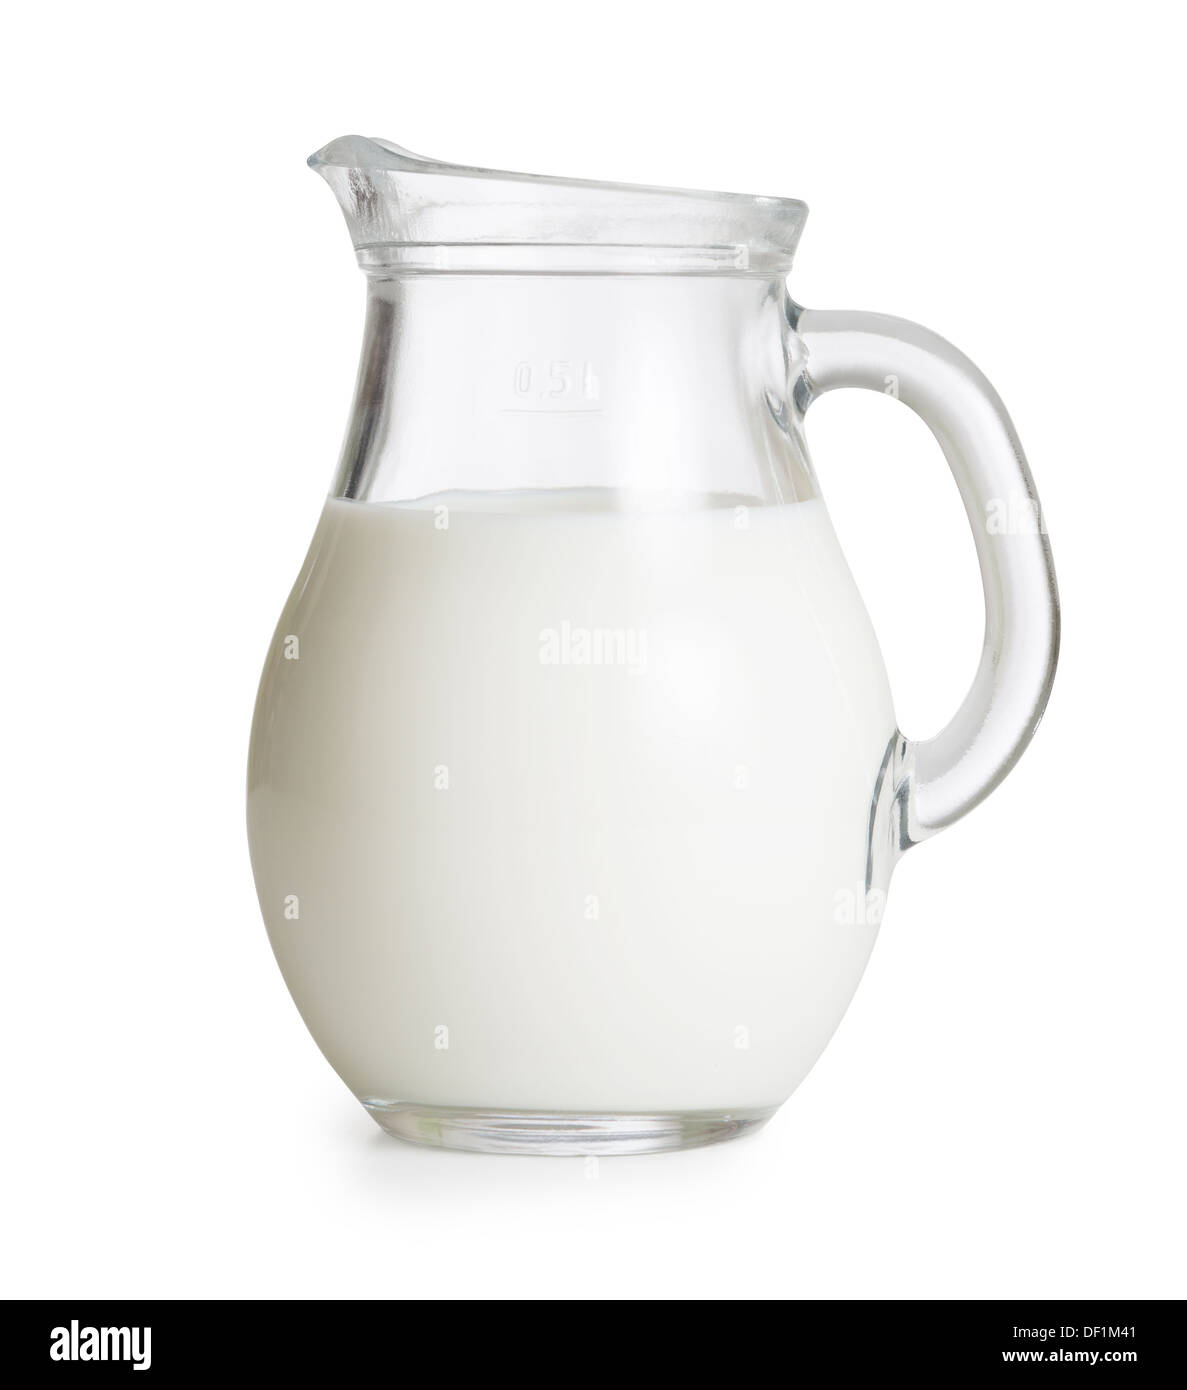 Milk glass jug or jar isolated. Clipping path with no shadows is included. Stock Photo